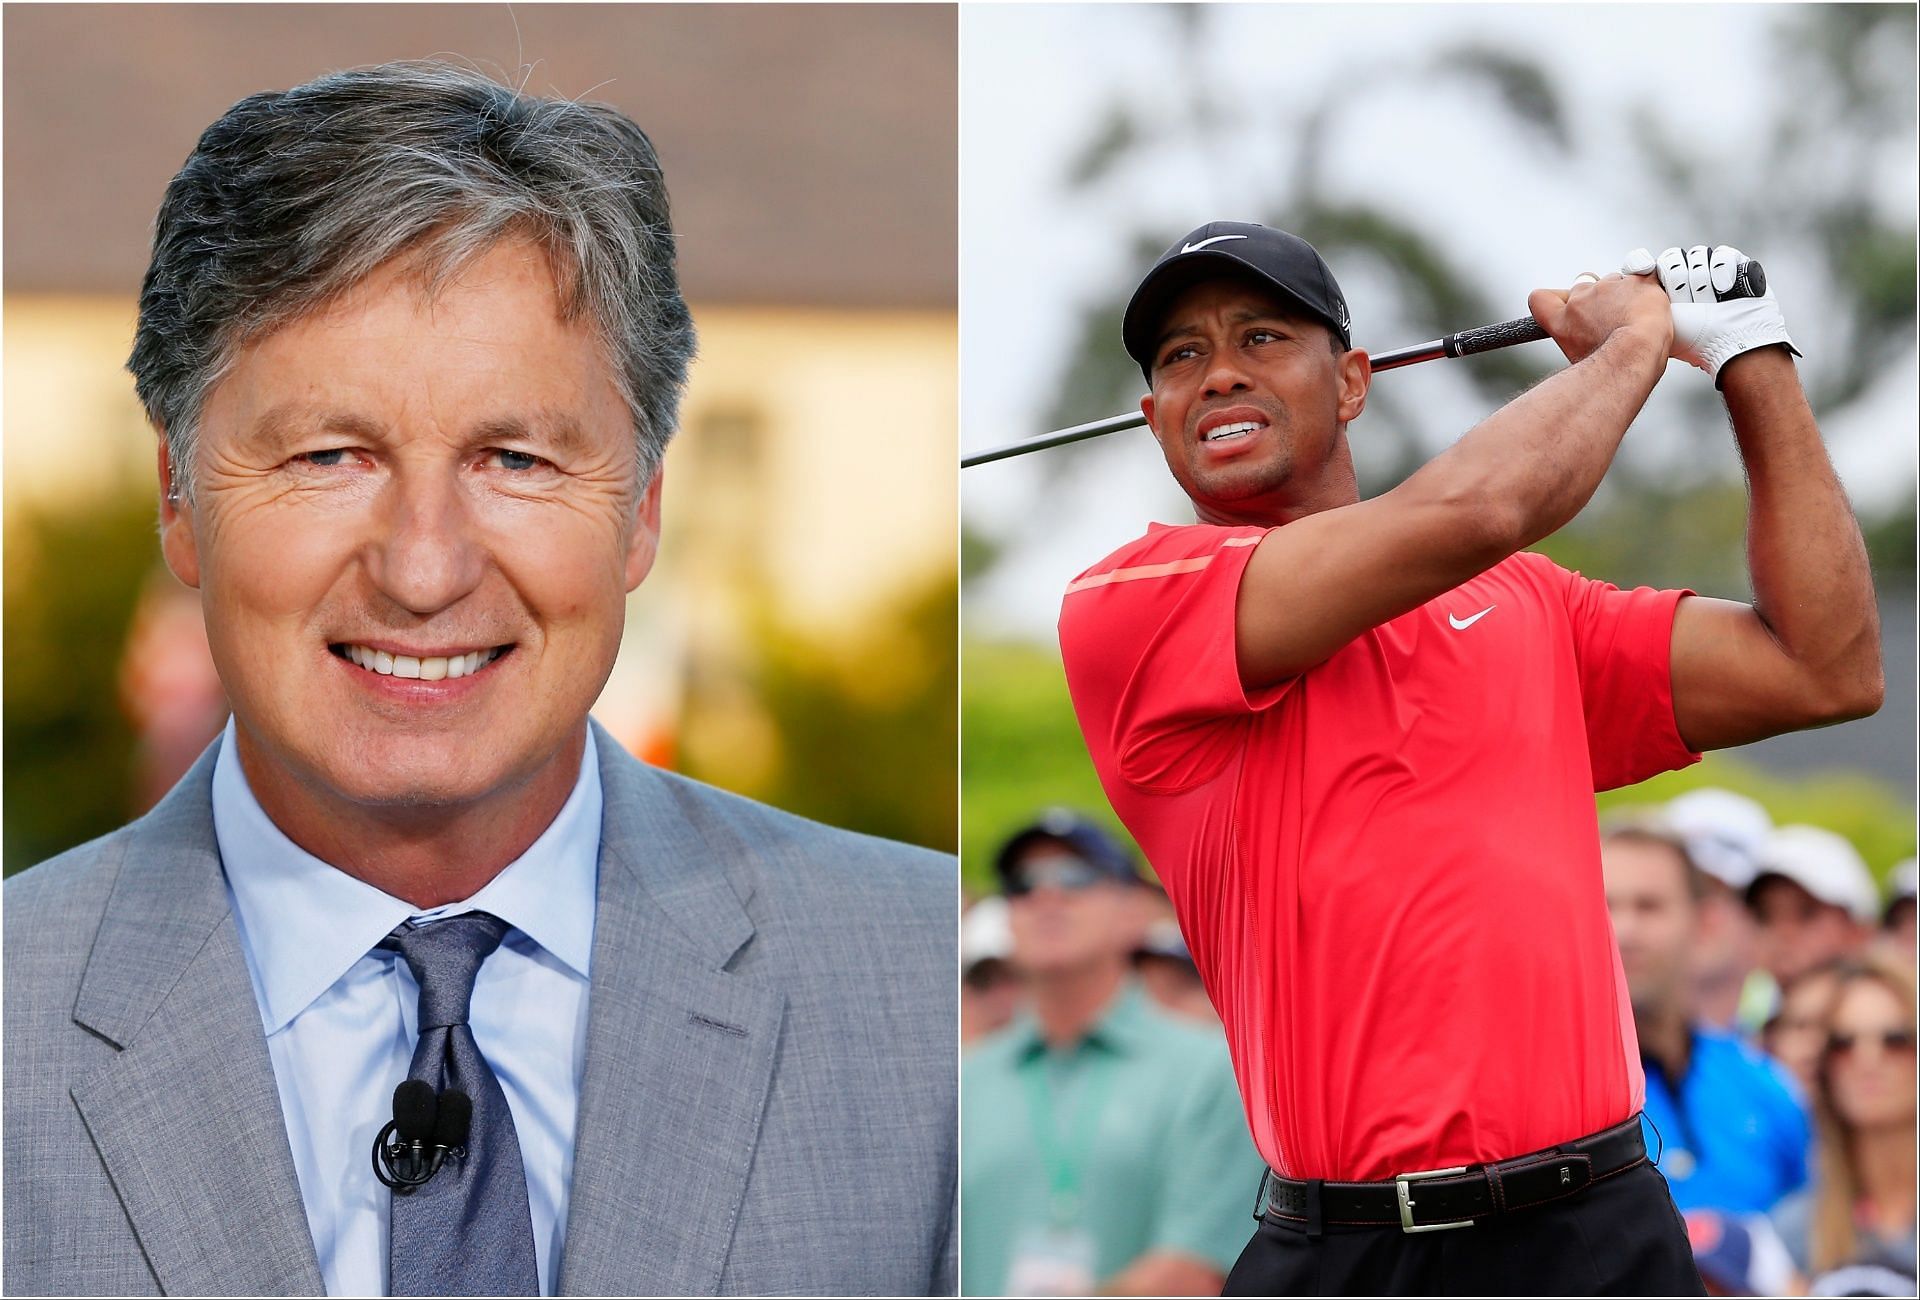 Brandel Chamblee and Tiger Woods (via Getty Images)